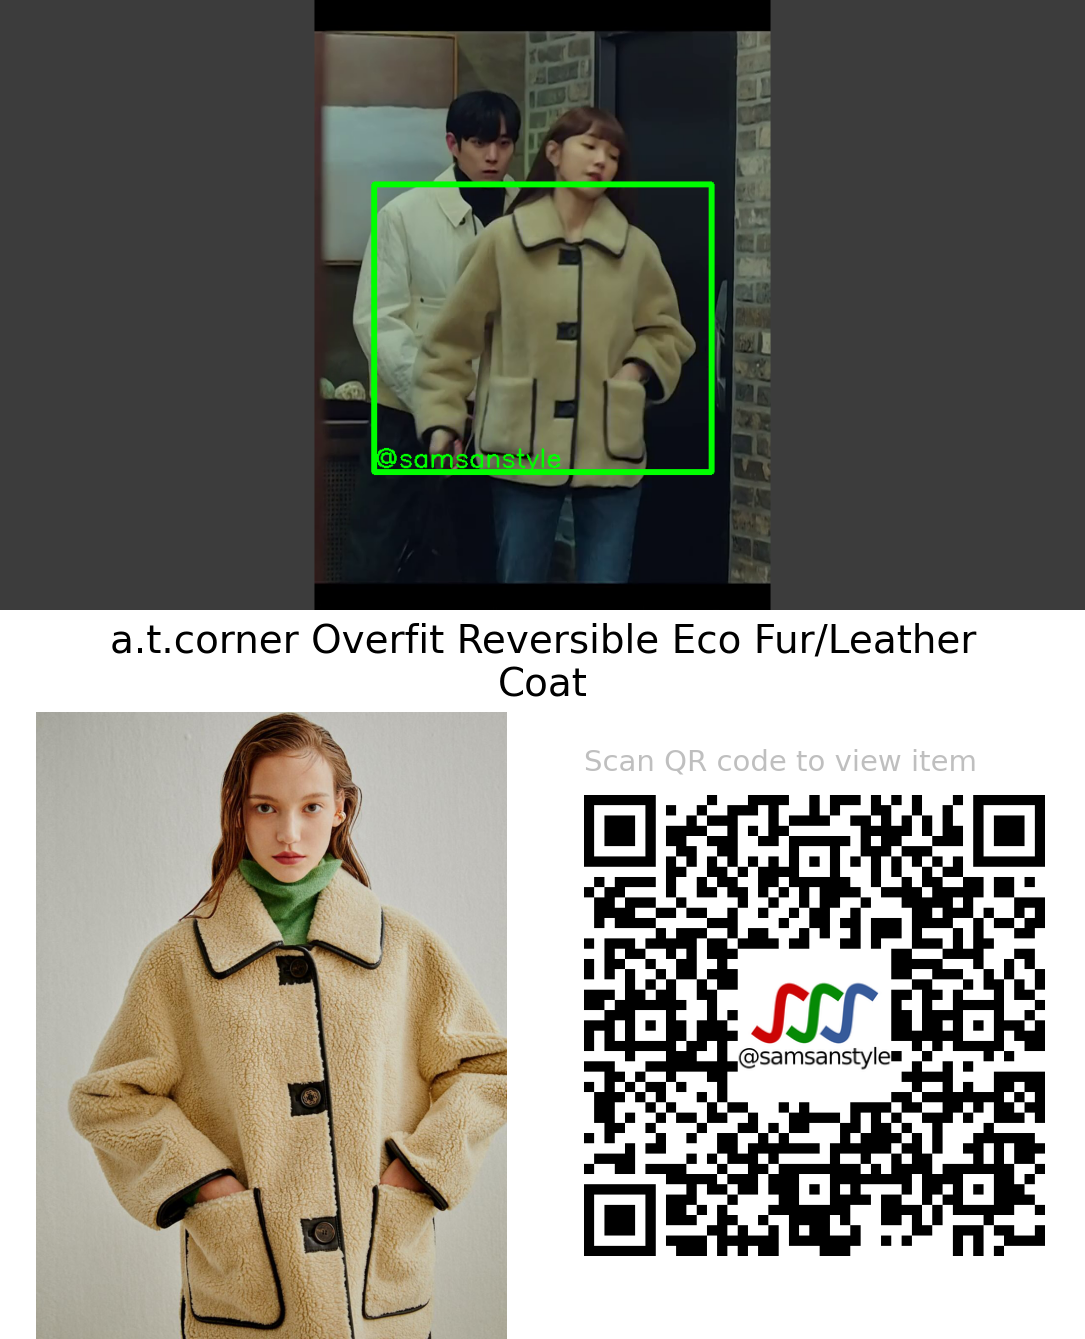 Lee Sungkyung | Shooting Stars E07 | a.t.corner Overfit Reversible Eco Fur/Leather Coat